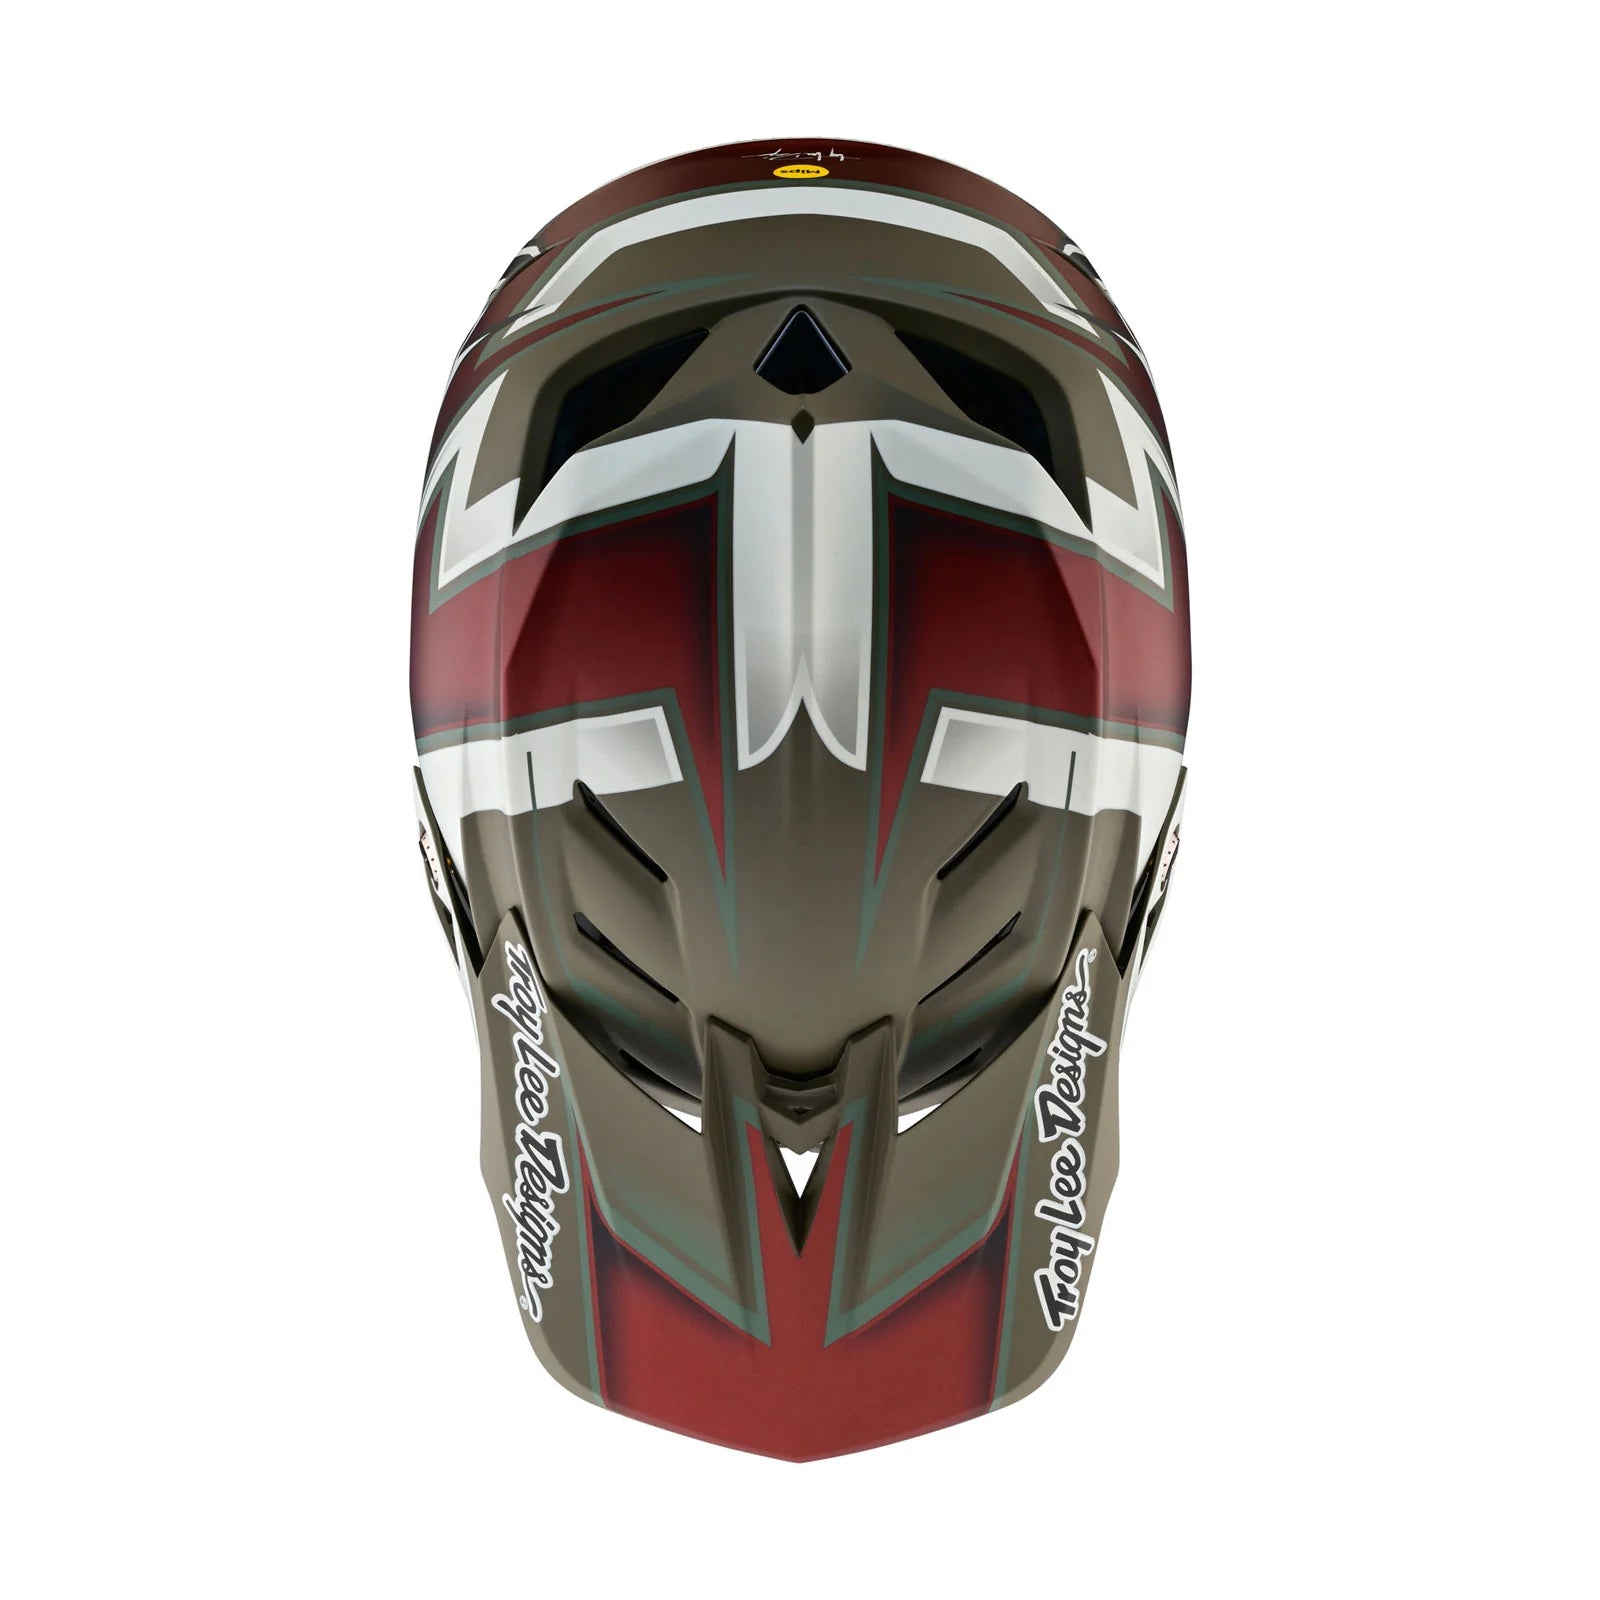 A TLD D4 AS Composite Helmet W/MIPS Ever Tarmac with a red and white design on it, featuring Mips system for improved safety.